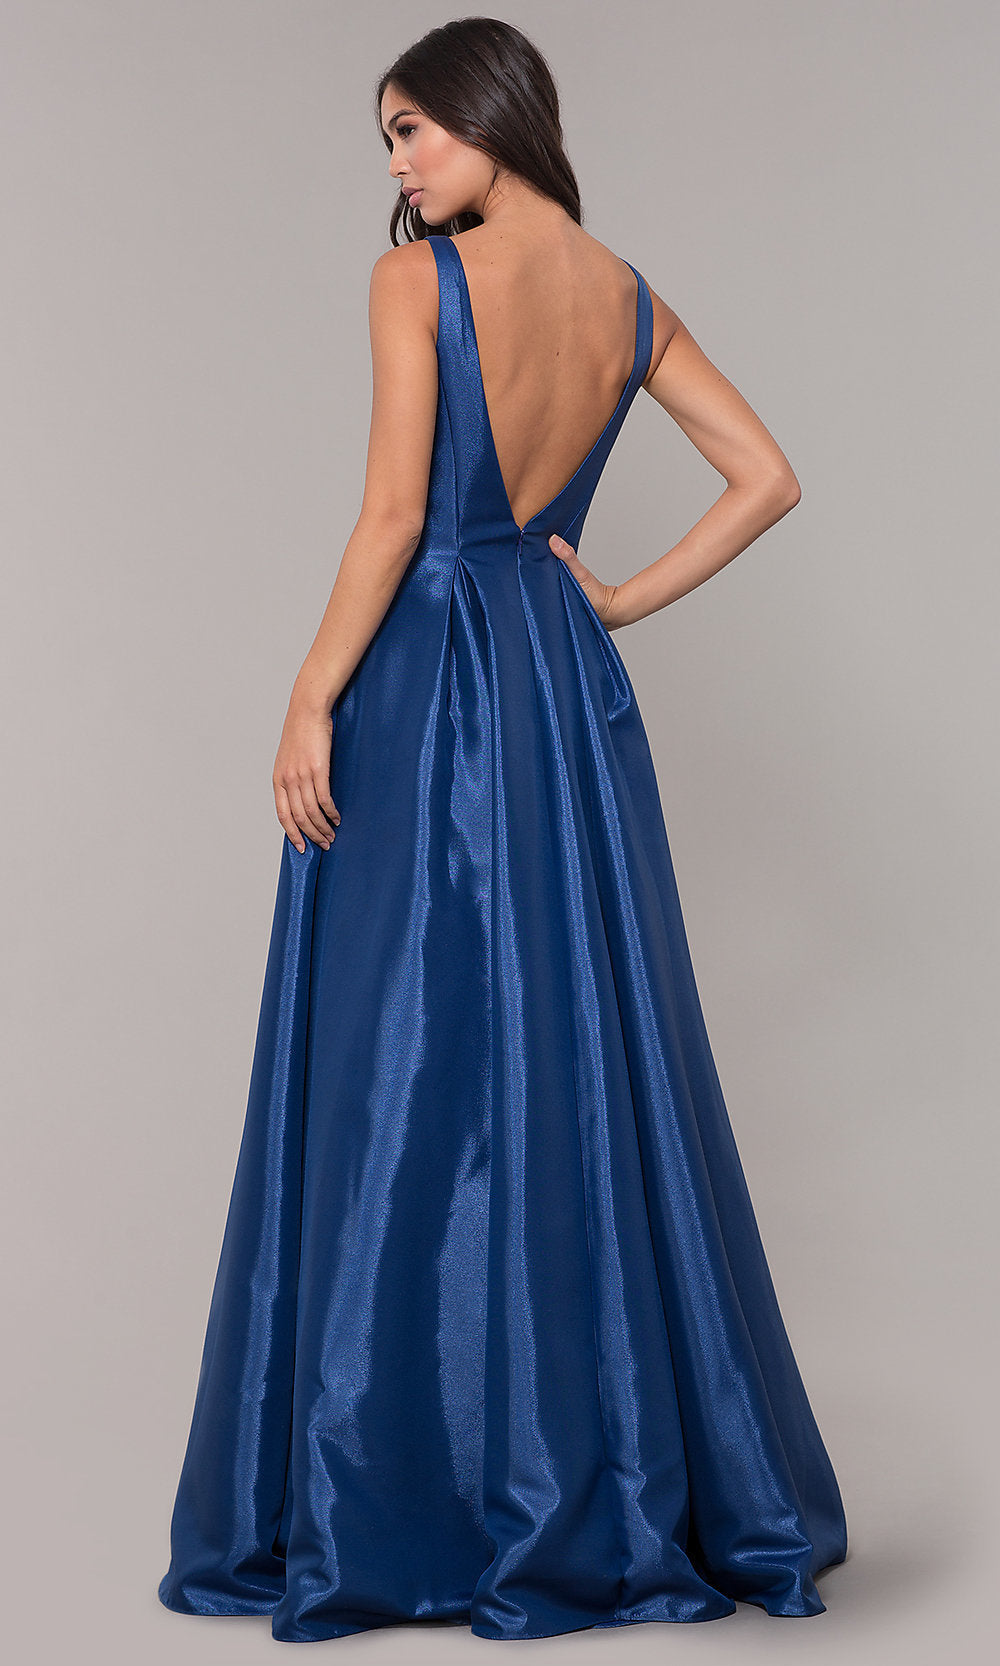  Long Satin A-Line Formal Gown with Sheer Sides